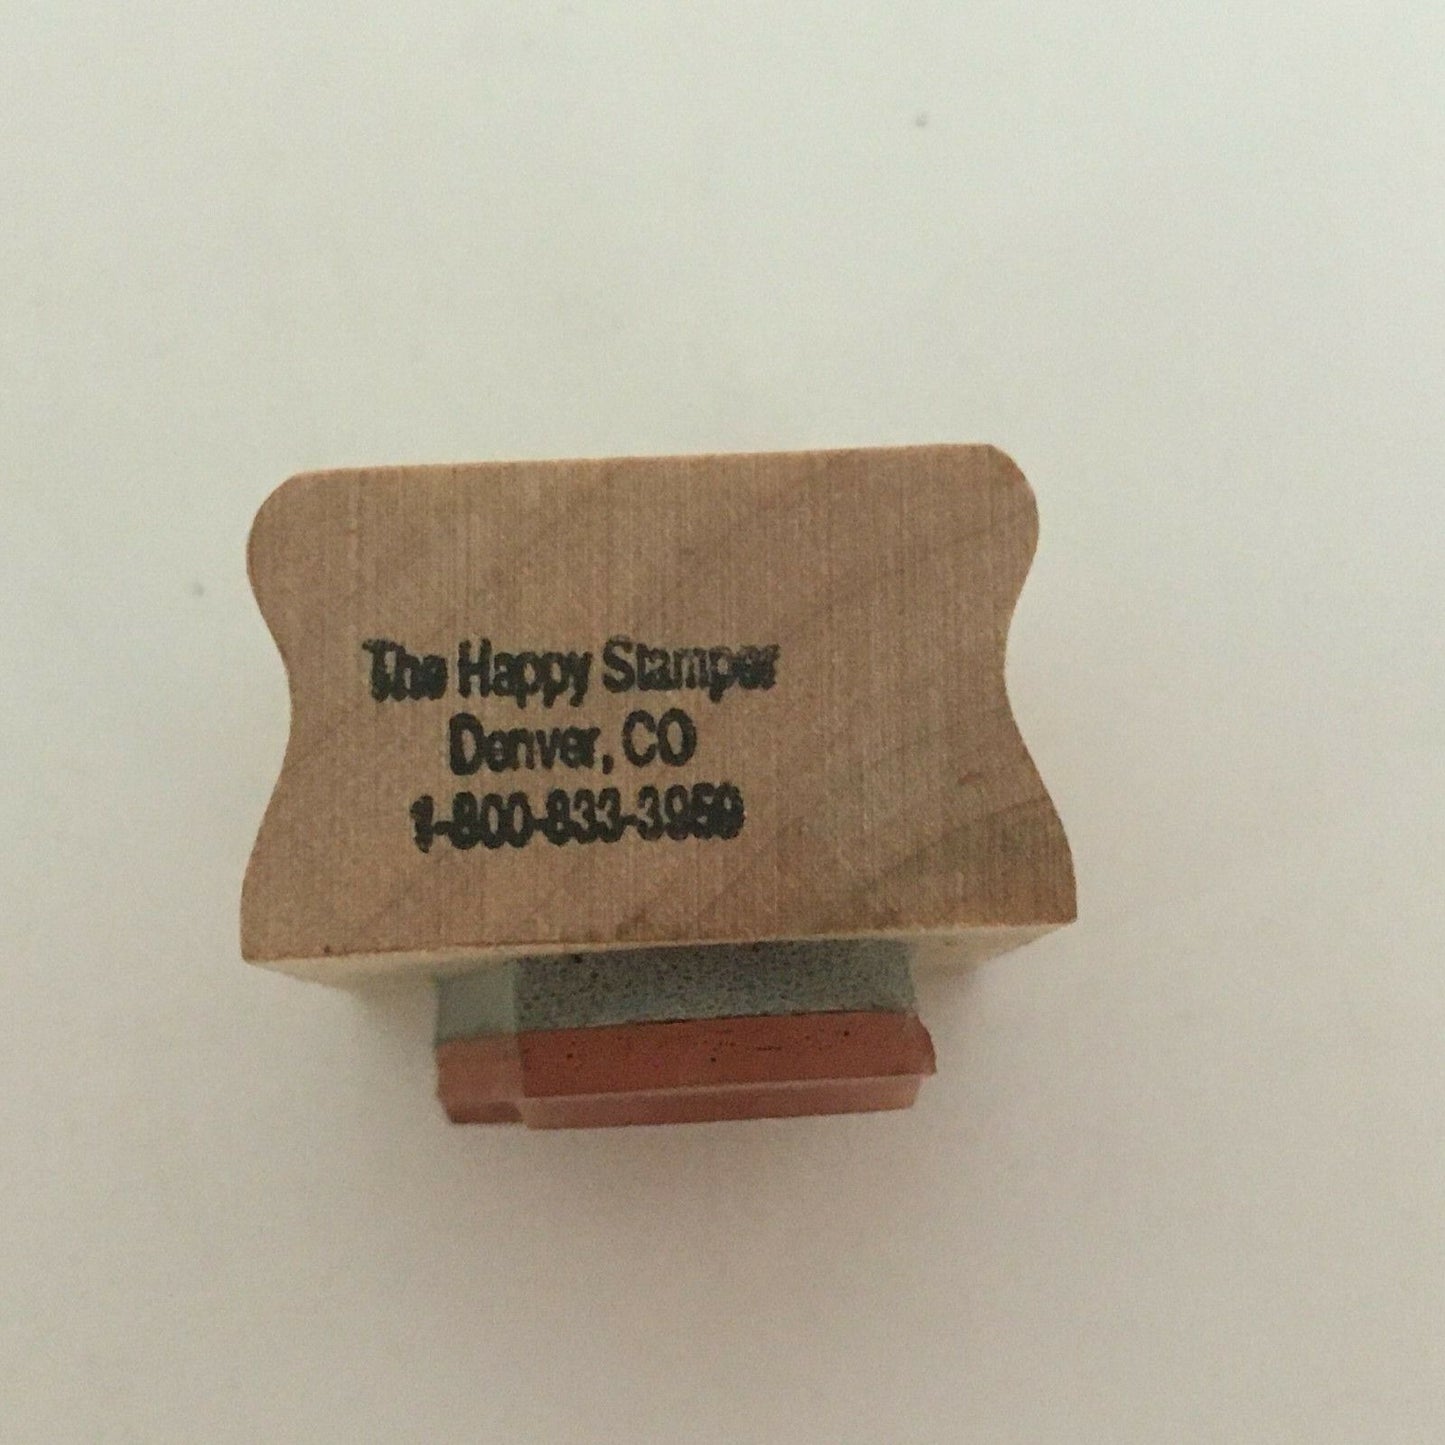 The Happy Stamper Rubber Stamp Diamond Ring Wedding Rings Marriage Card Making